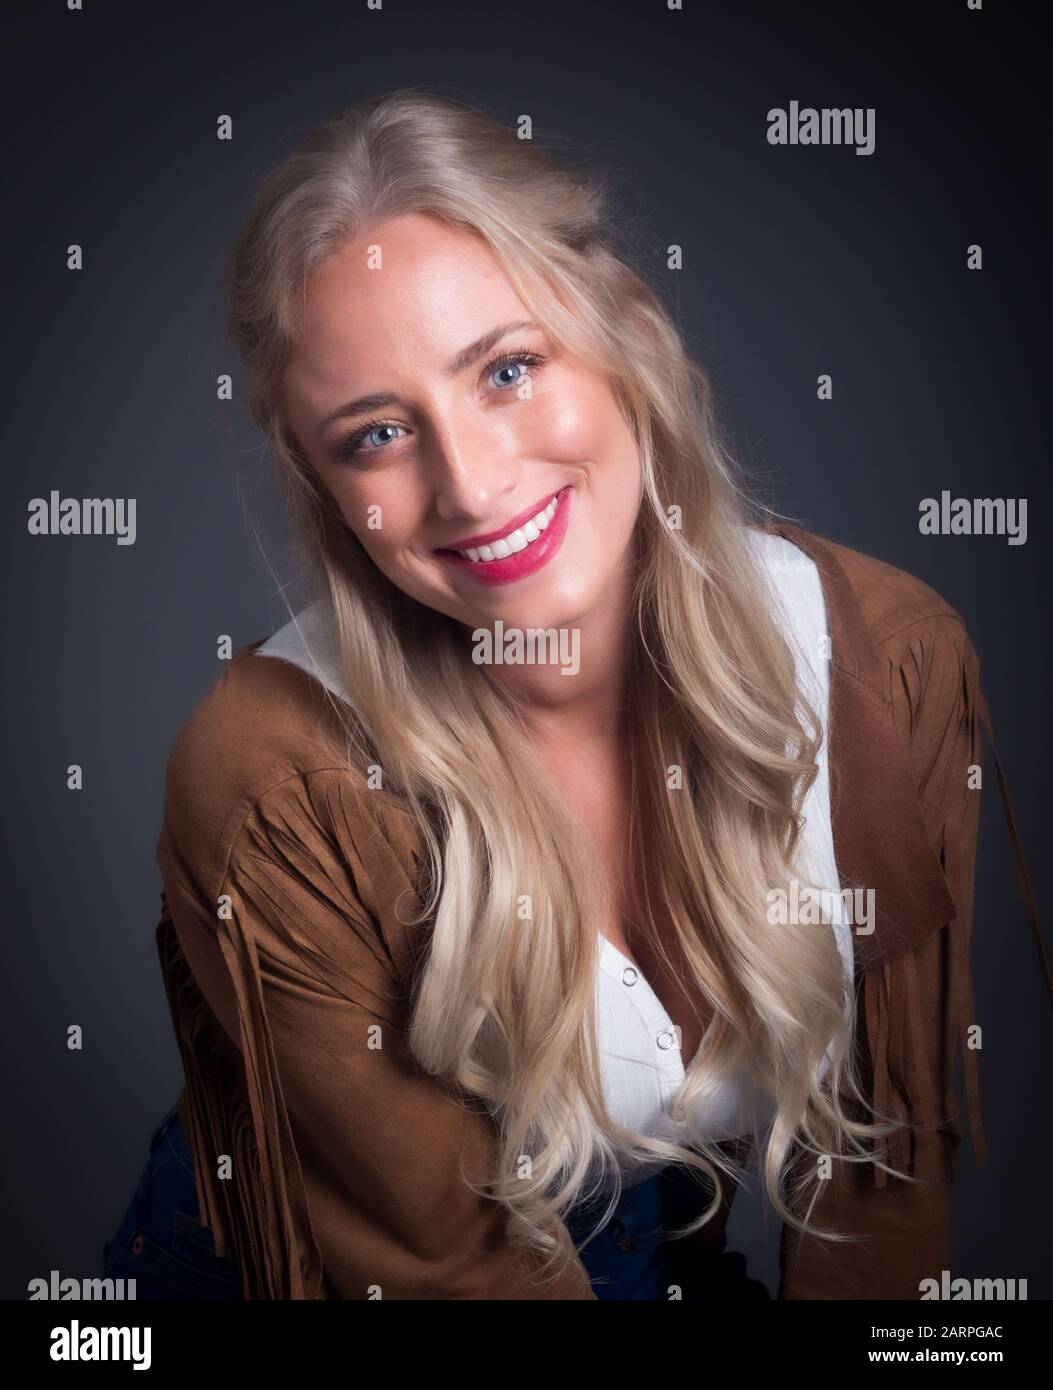 Attractive woman posing in a cowboy style fringe outfit in studio setting Stock Photo